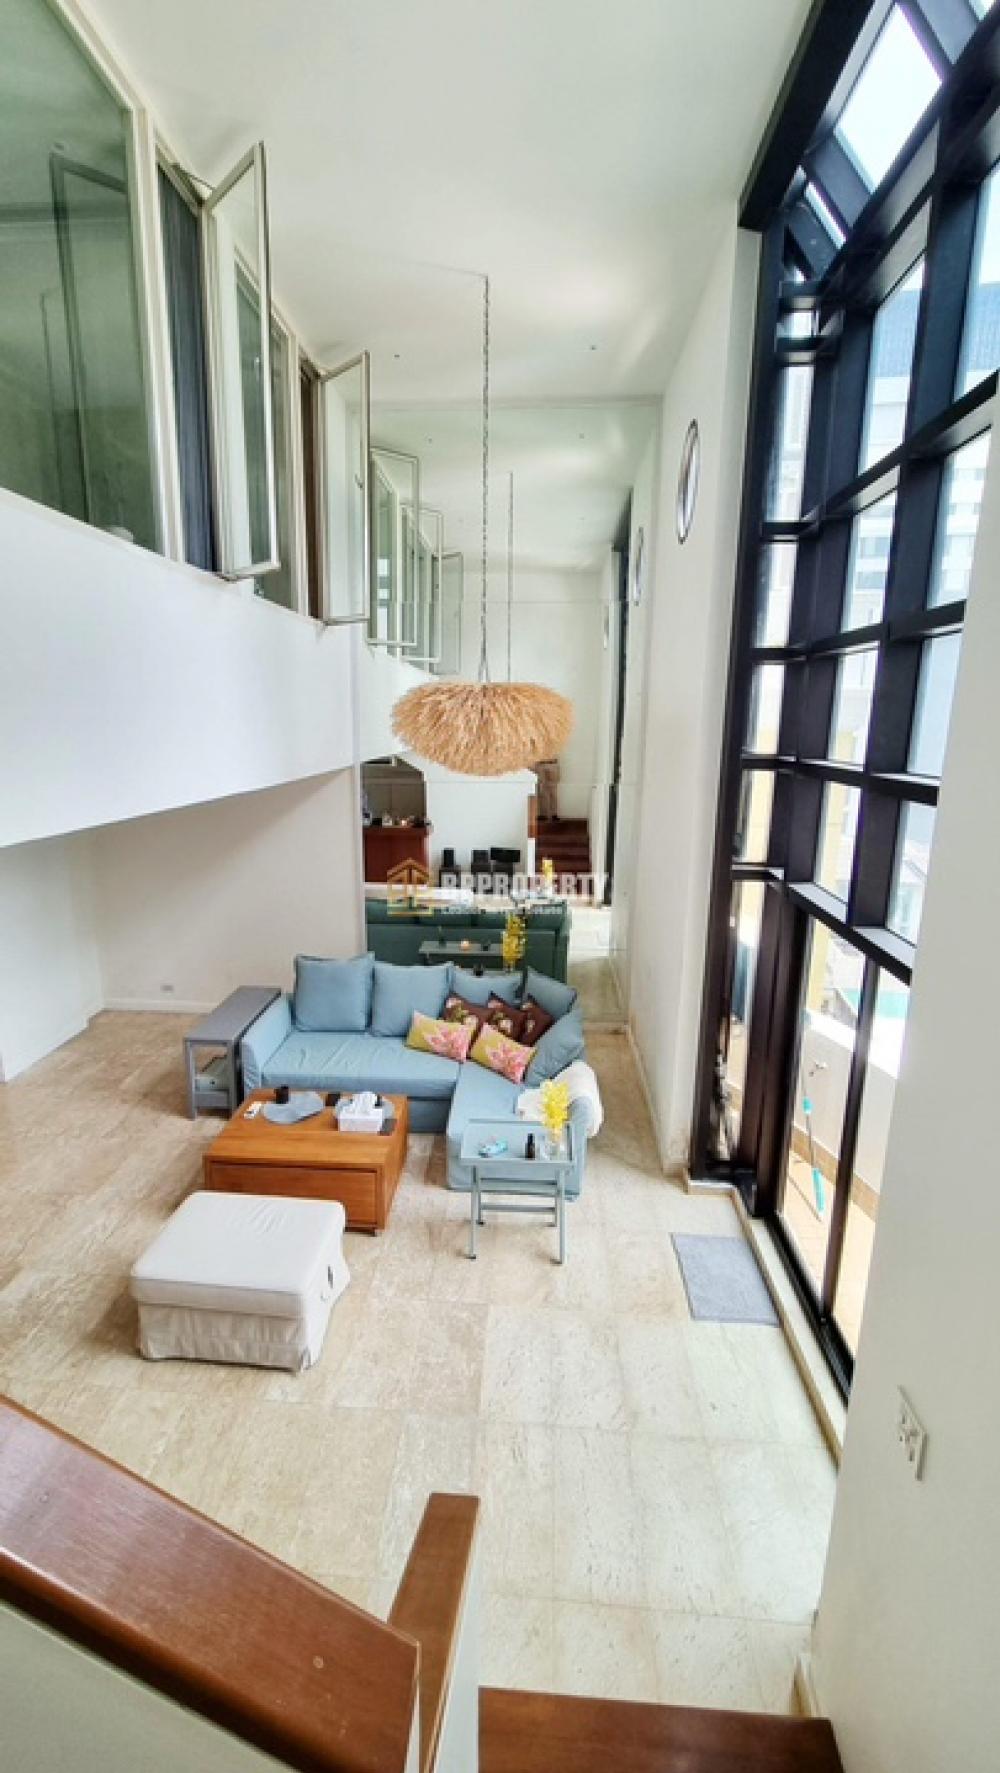 For SaleCondoSilom, Saladaeng, Bangrak : Condo for sale : Pipat Place (Sathorn Soi6 / Silom Soi3)  Selling price: 10,500,000 THB1 bedroom 2 bedrooms-Size 106 sqm.-1 massive bedroom / 1 cozy bathroom with jaguzzi– Built-in walk-in closet– Duplex type– on highest floor on both 7th-8th– the